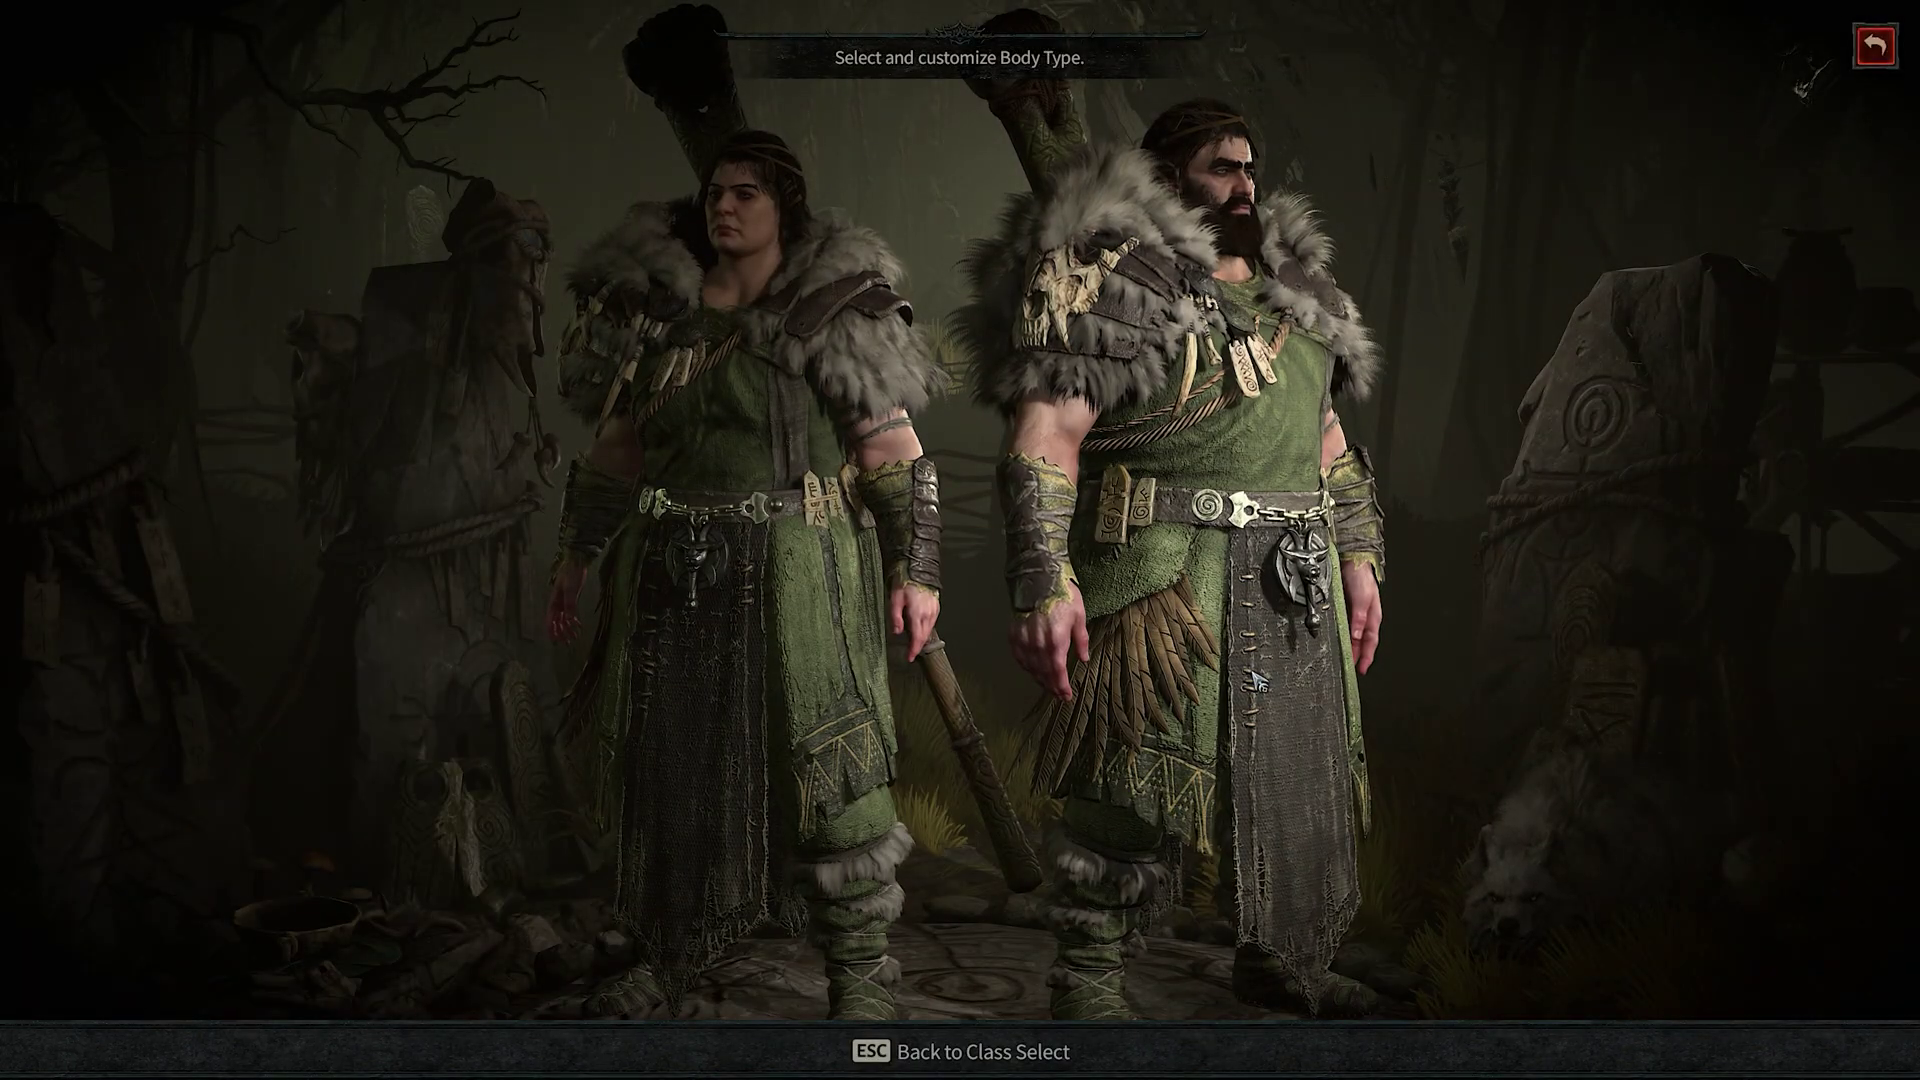 An image of the body type selection screen for the Druid in Diablo 4, featuring a smaller, less hairy Druid on the left side and a taller, more muscular, bearded Druid on the right